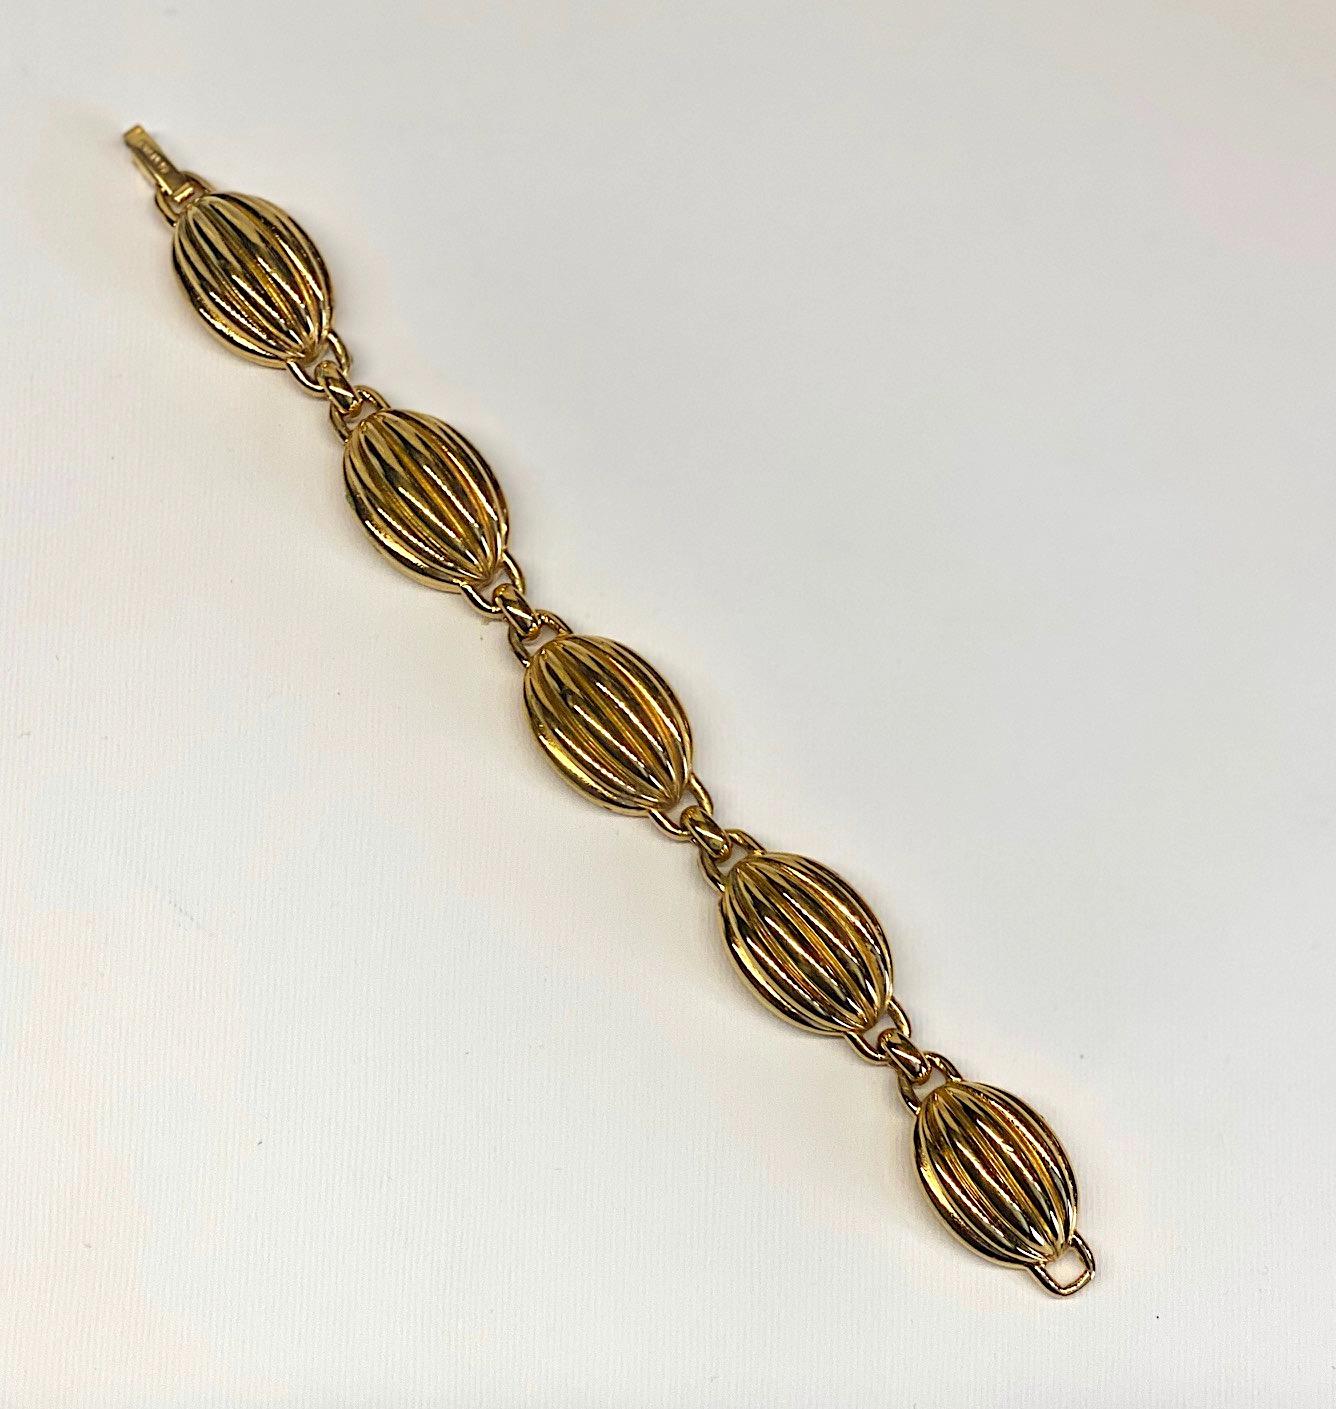 A beautiful dome link Lanvin bracelet from the 1980s. The five links are cast in a dome shape with six deep ribs or scallops with a ring at each end. A single small oval link connects each larger ones. The bracelet measures .75 of an inch wide, .5